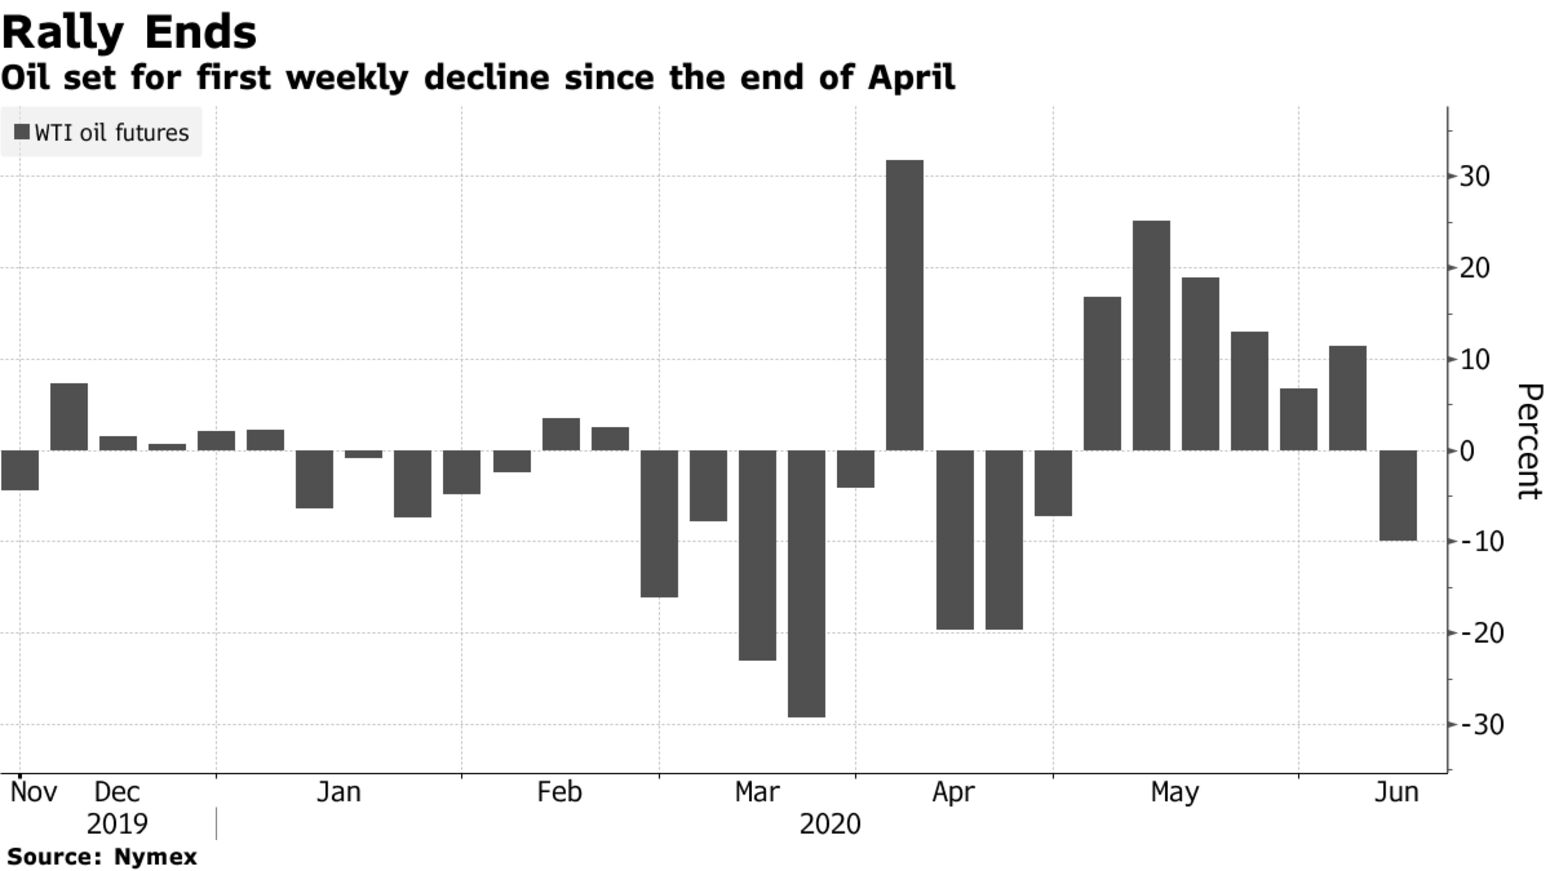 Oil set for first weekly decline since the end of April